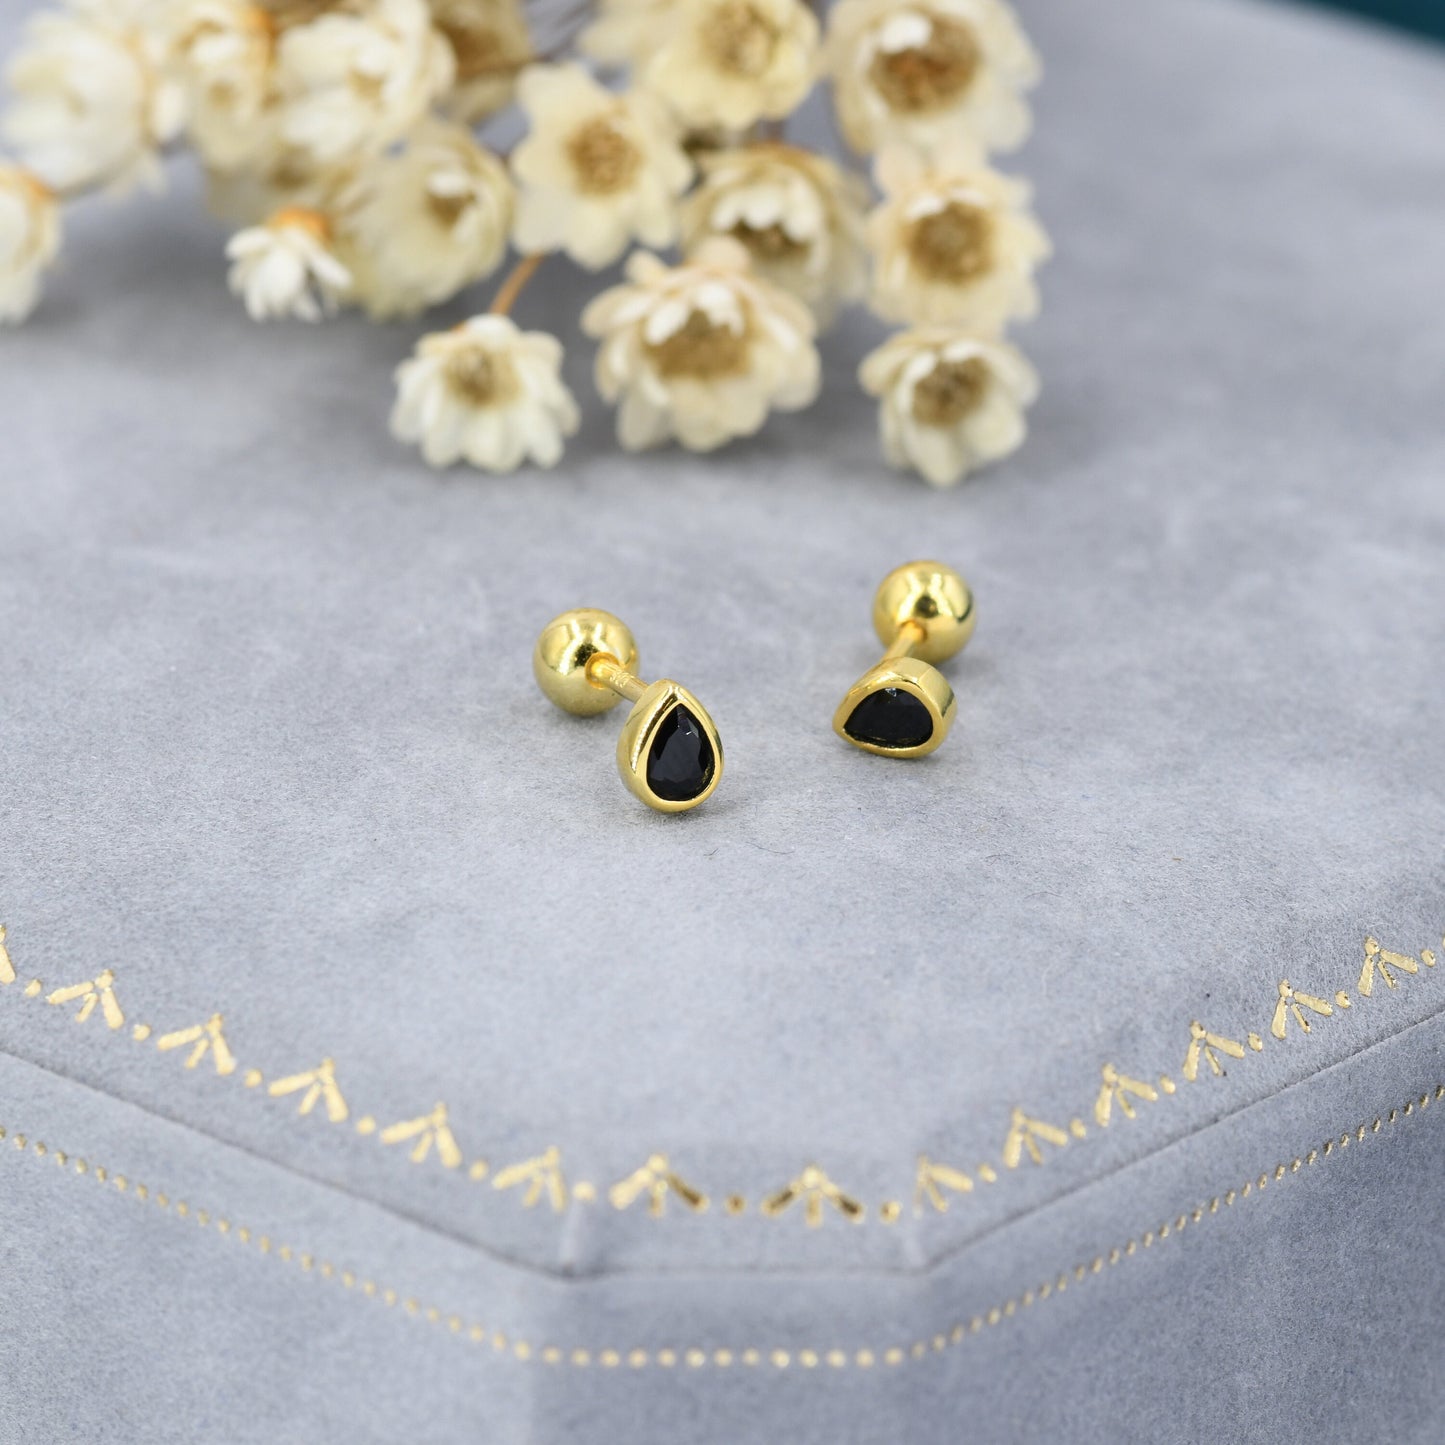 Extra Tiny Black CZ Droplet Screw Back Earrings in Sterling Silver, Silver or Gold, Black CZ Screwback Earrings, Barbell